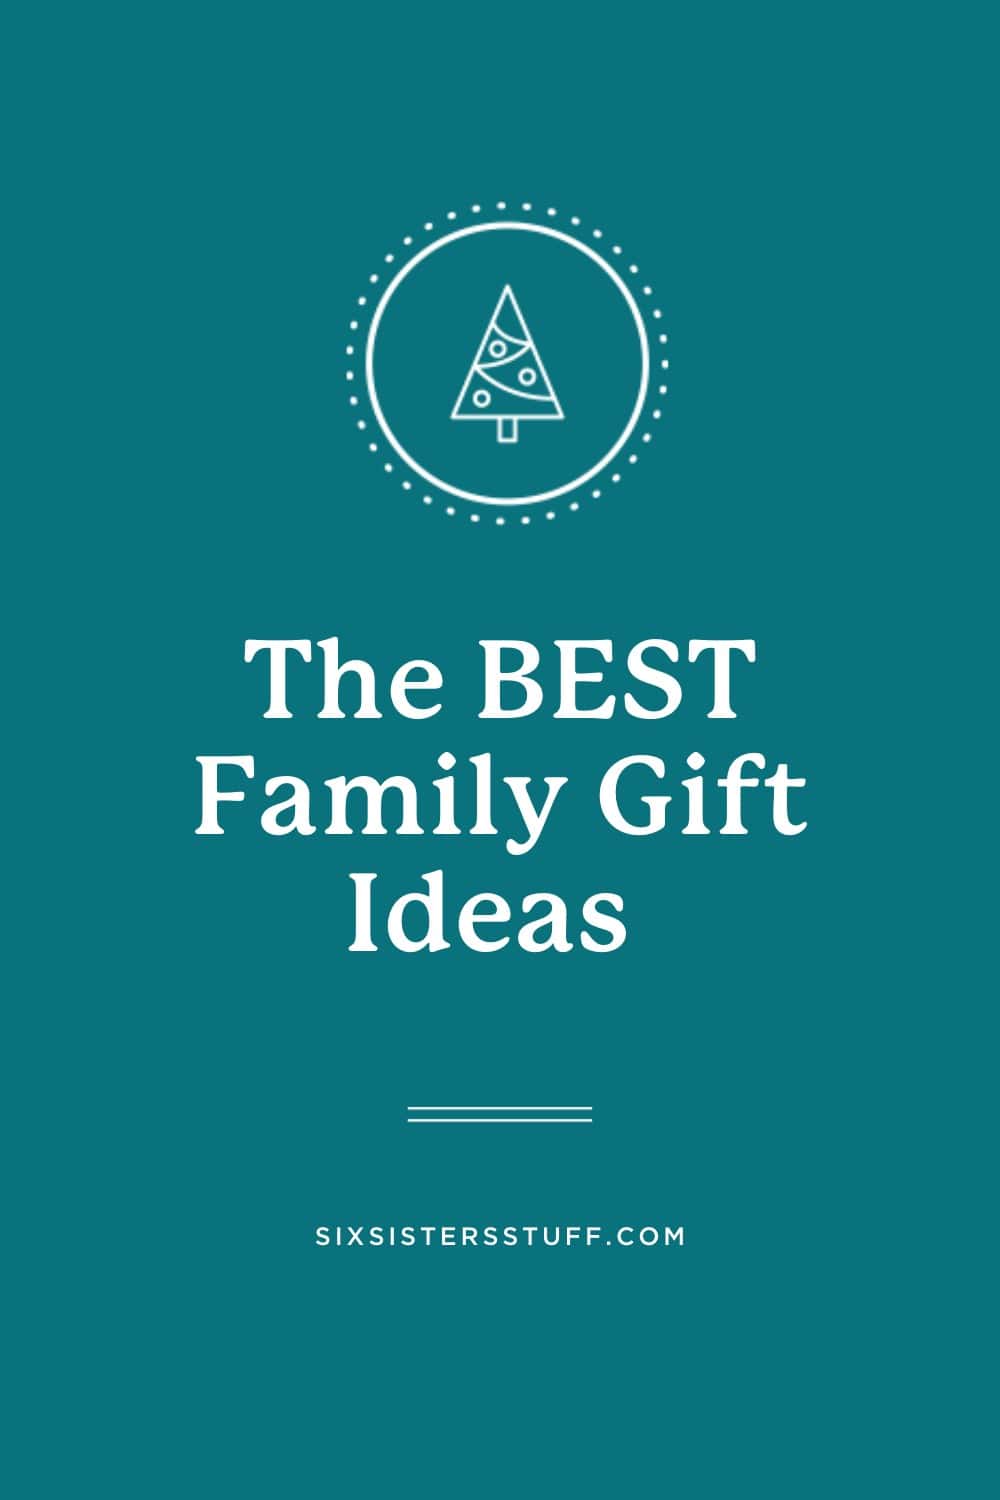 The BEST Family Gift Ideas